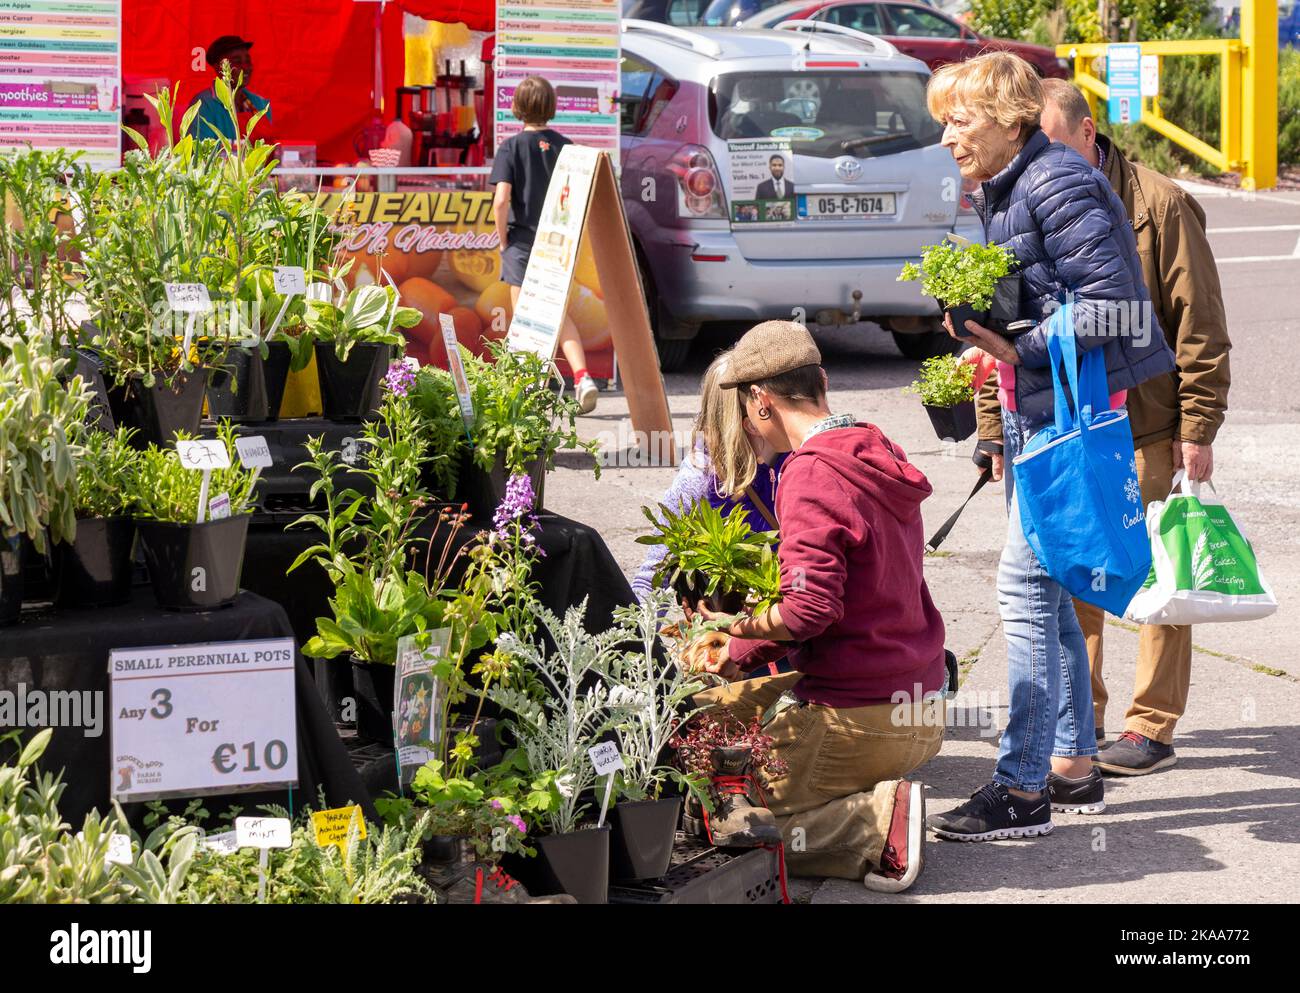 Queue of people buying herbs and plants at country market stall Stock Photo